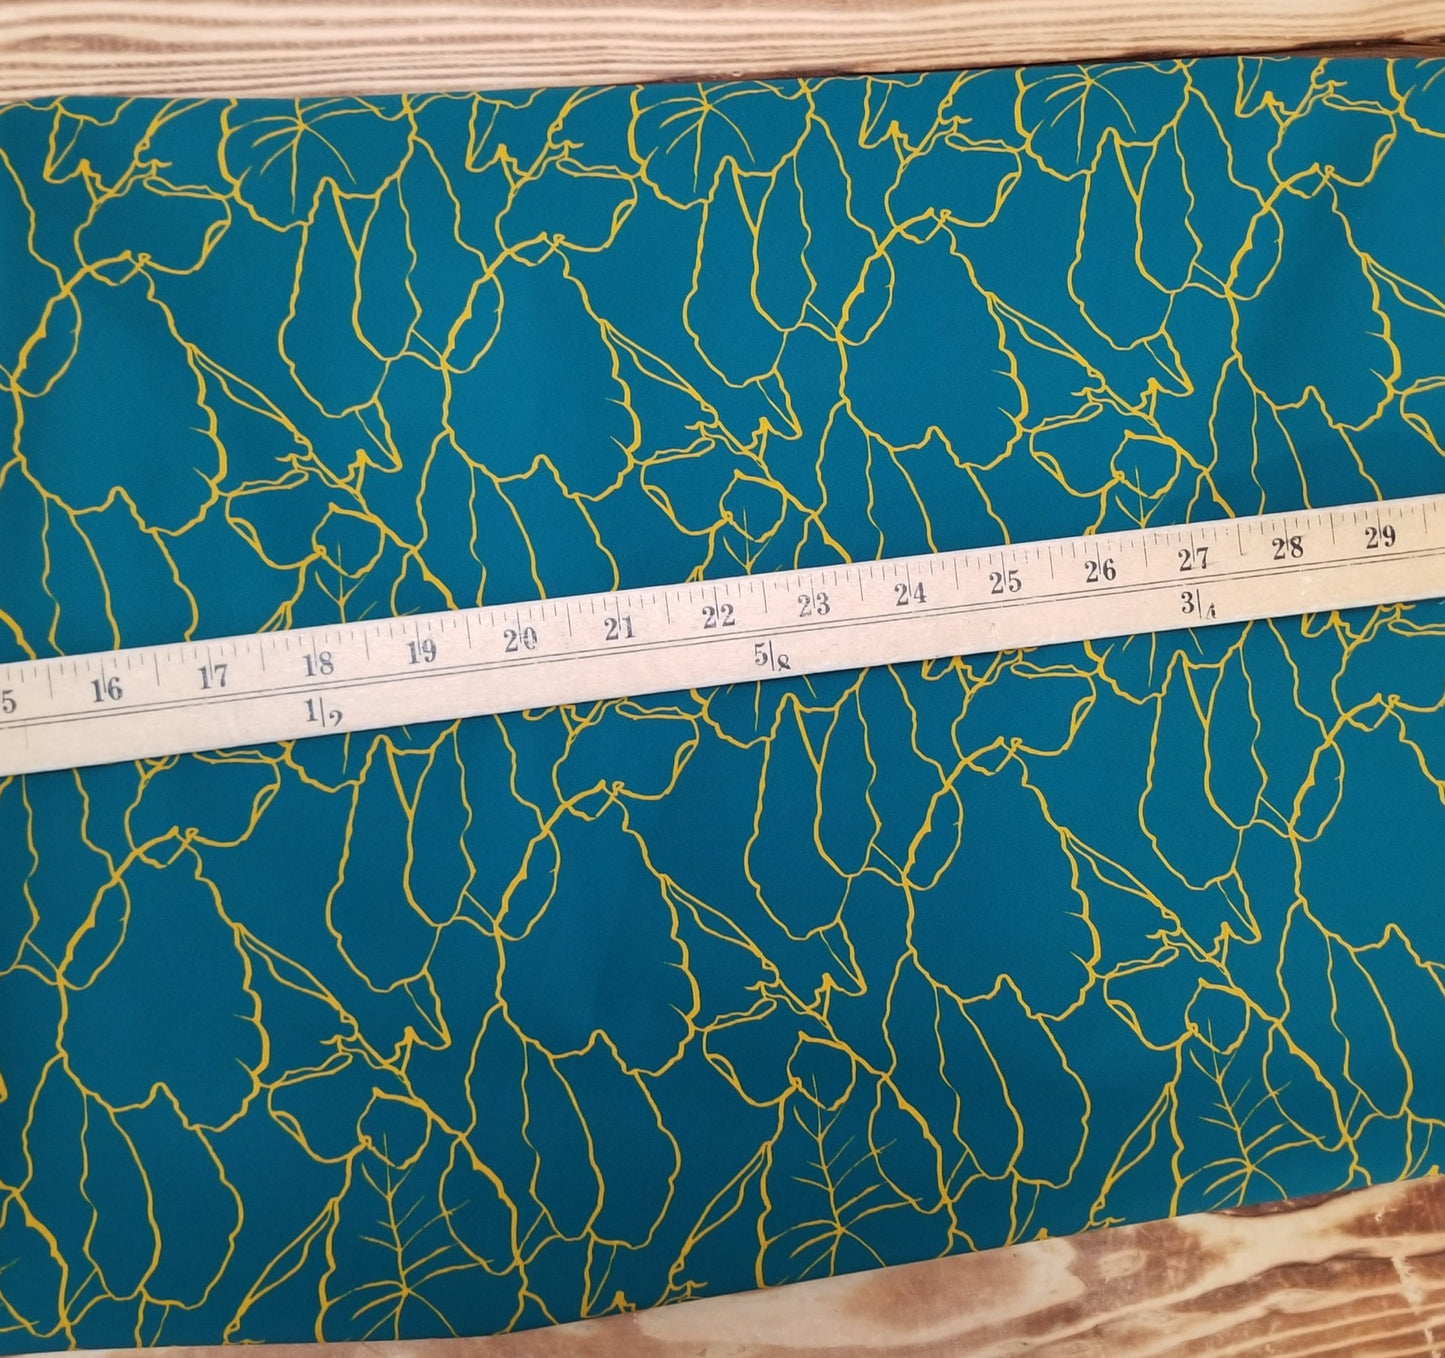 Designer Deadstock Nylon Spandex Swim Performance Wear Abstract Scribble Plants Golden and Teal Conversational Knit- by the yard